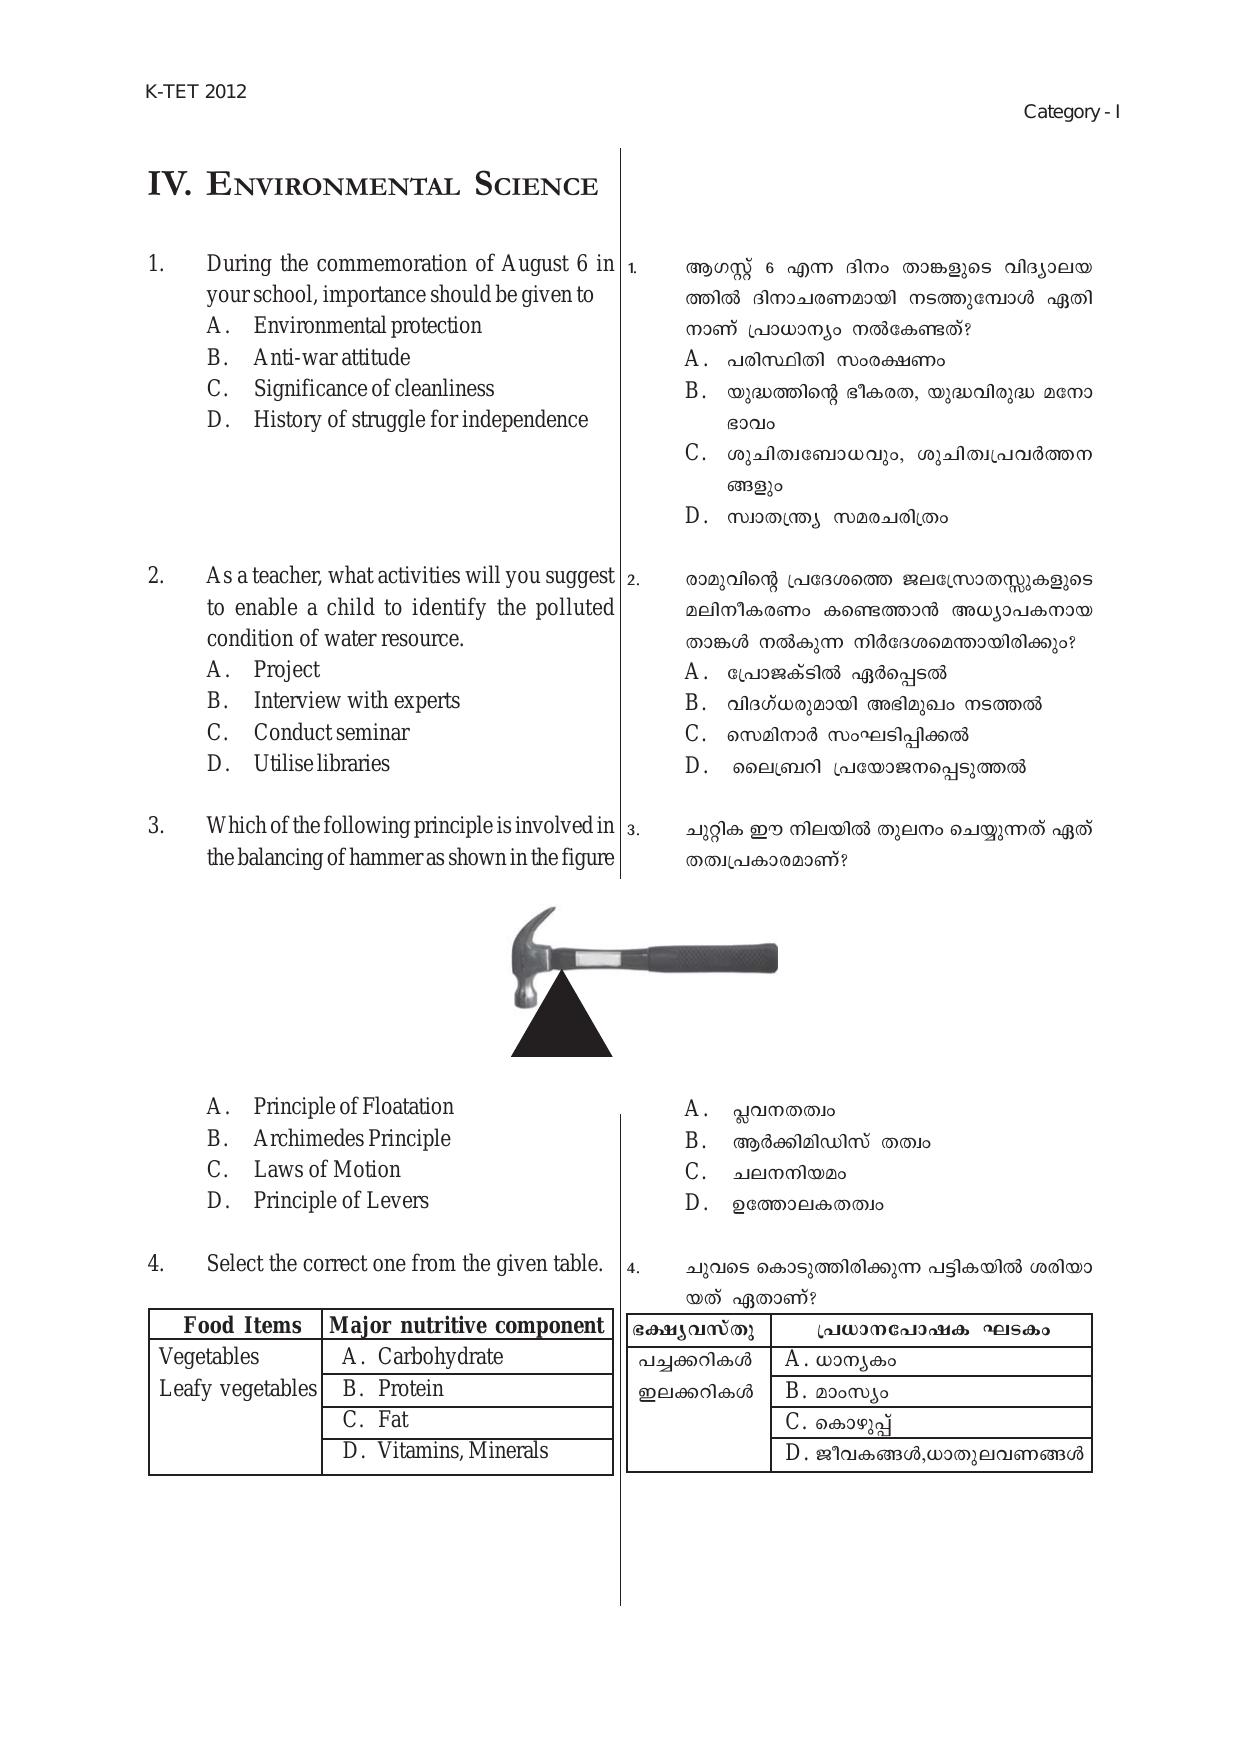 KTET Category 1 - Lower Primary Teacher (Class 1-5) Exam Old Papers - Page 11